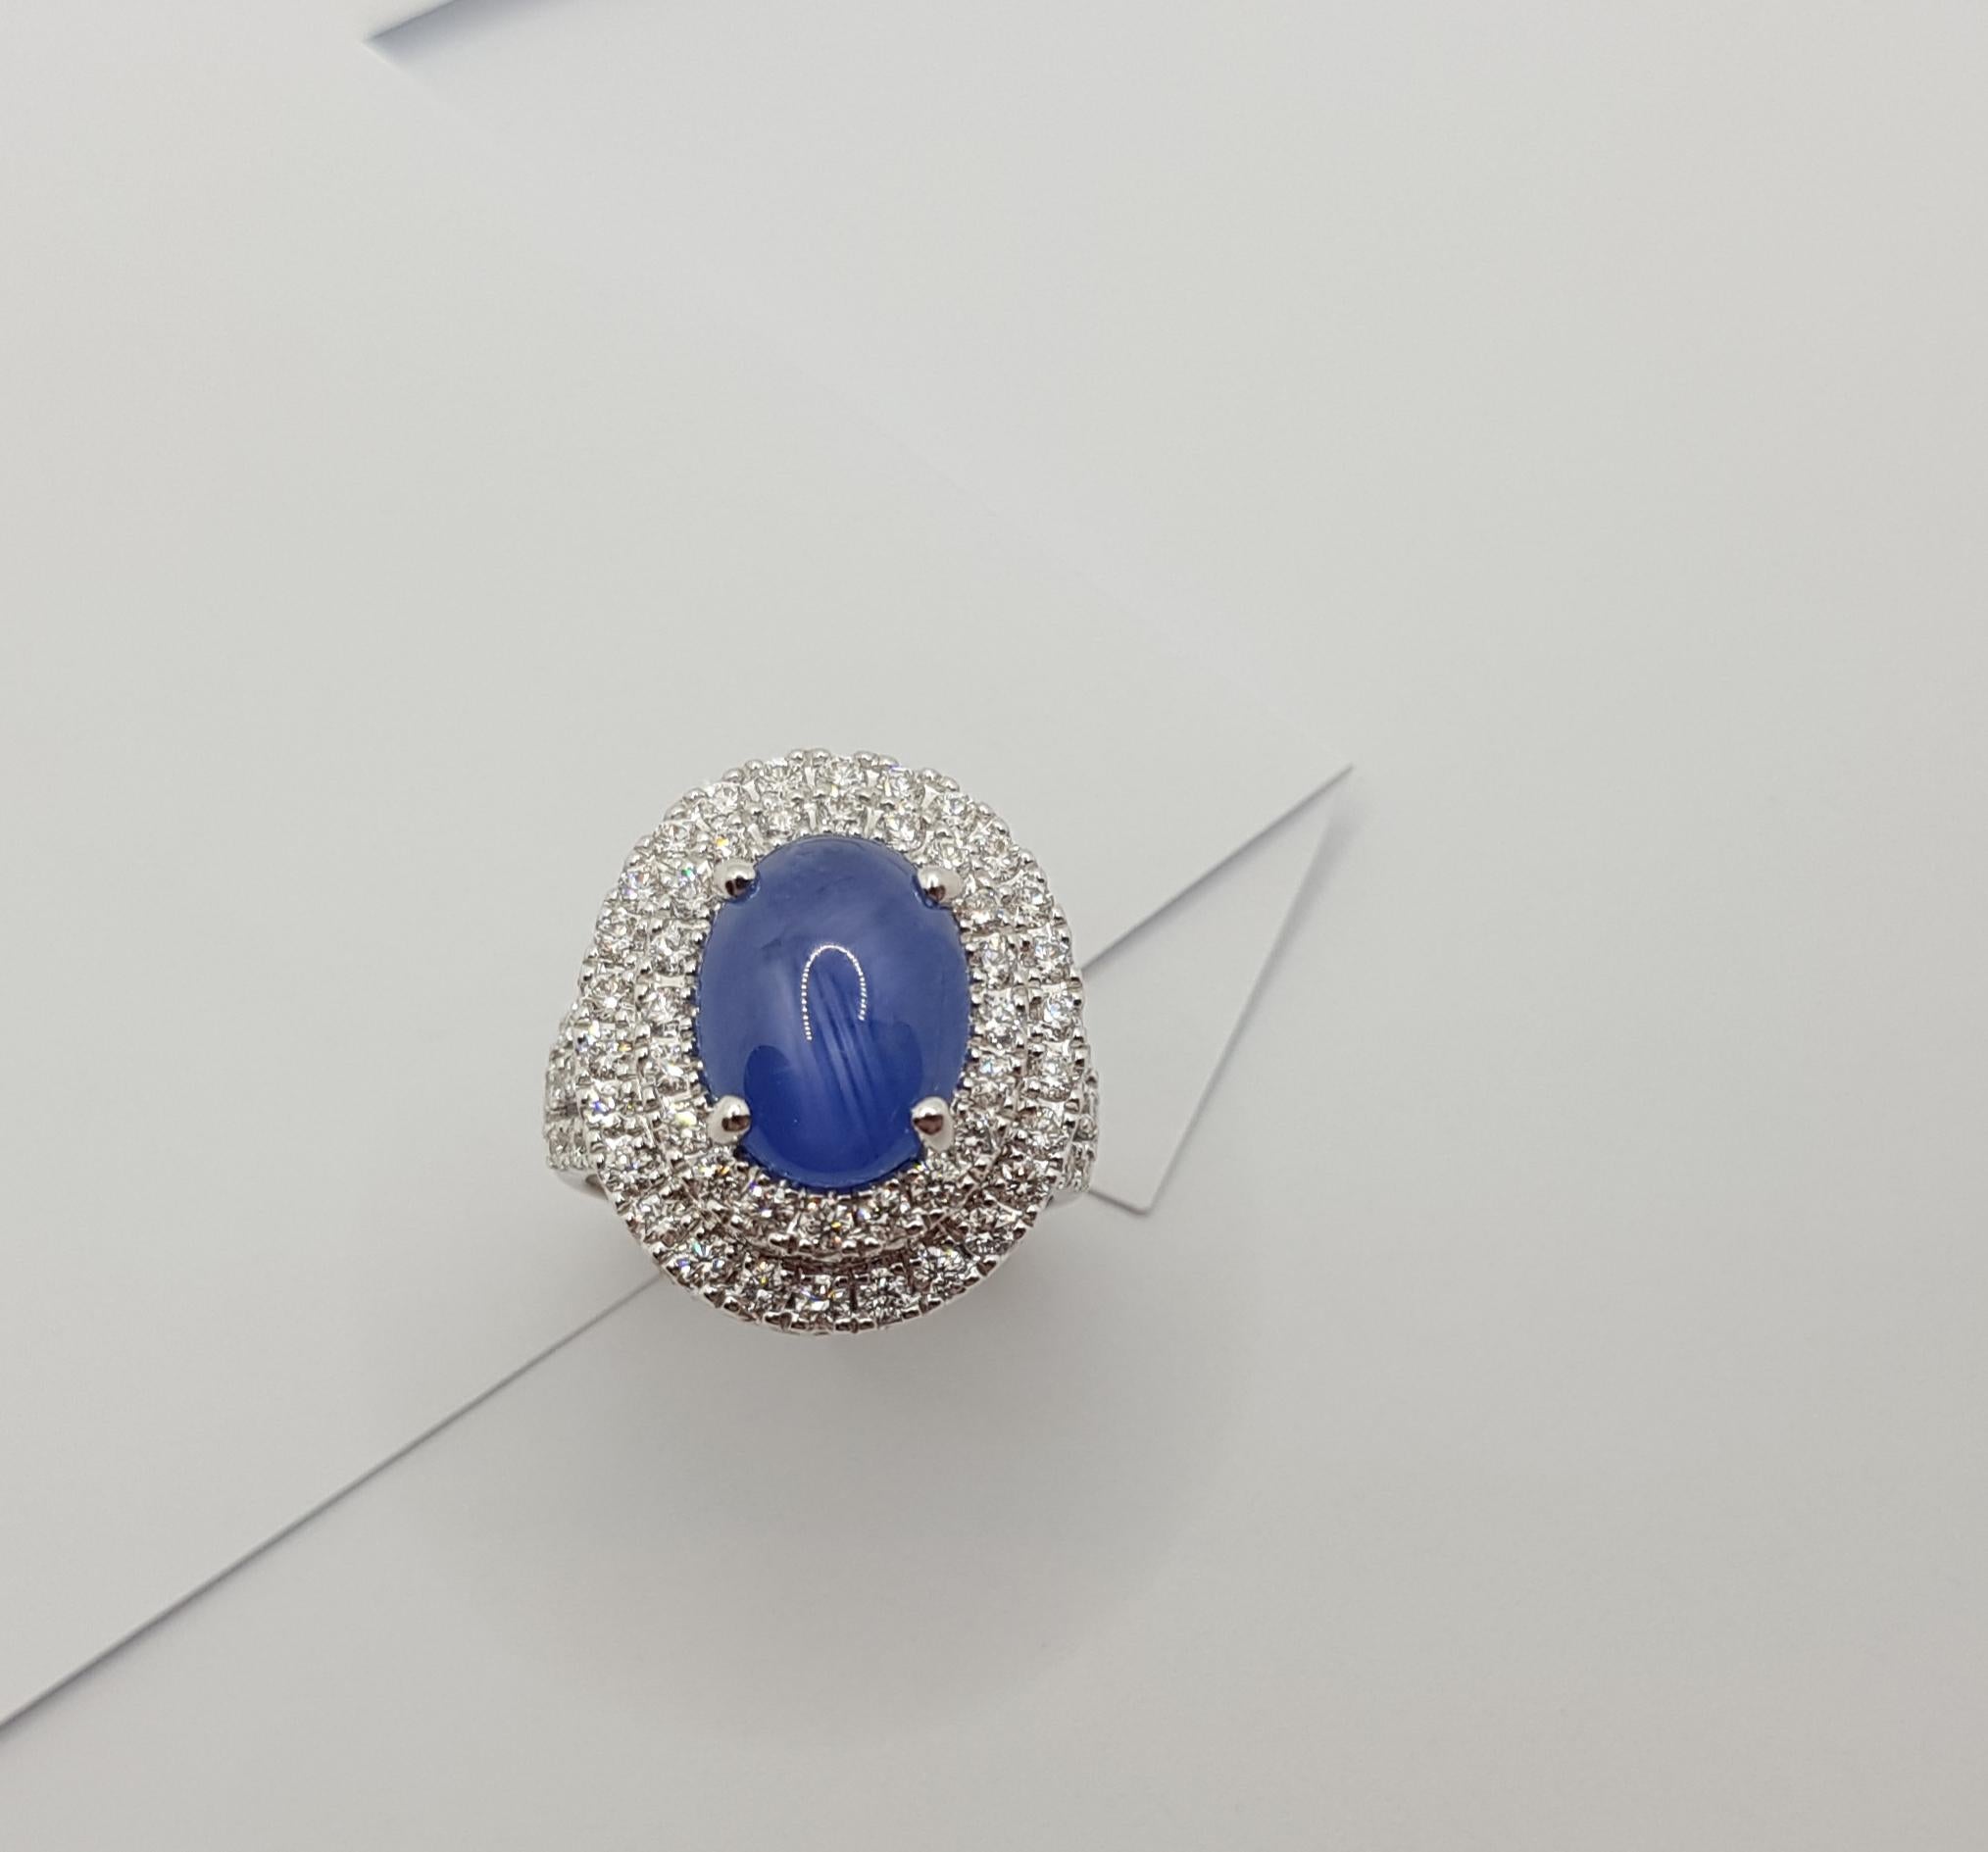 Blue Star Sapphire with Diamond Ring Set in 18 Karat White Gold Settings For Sale 4